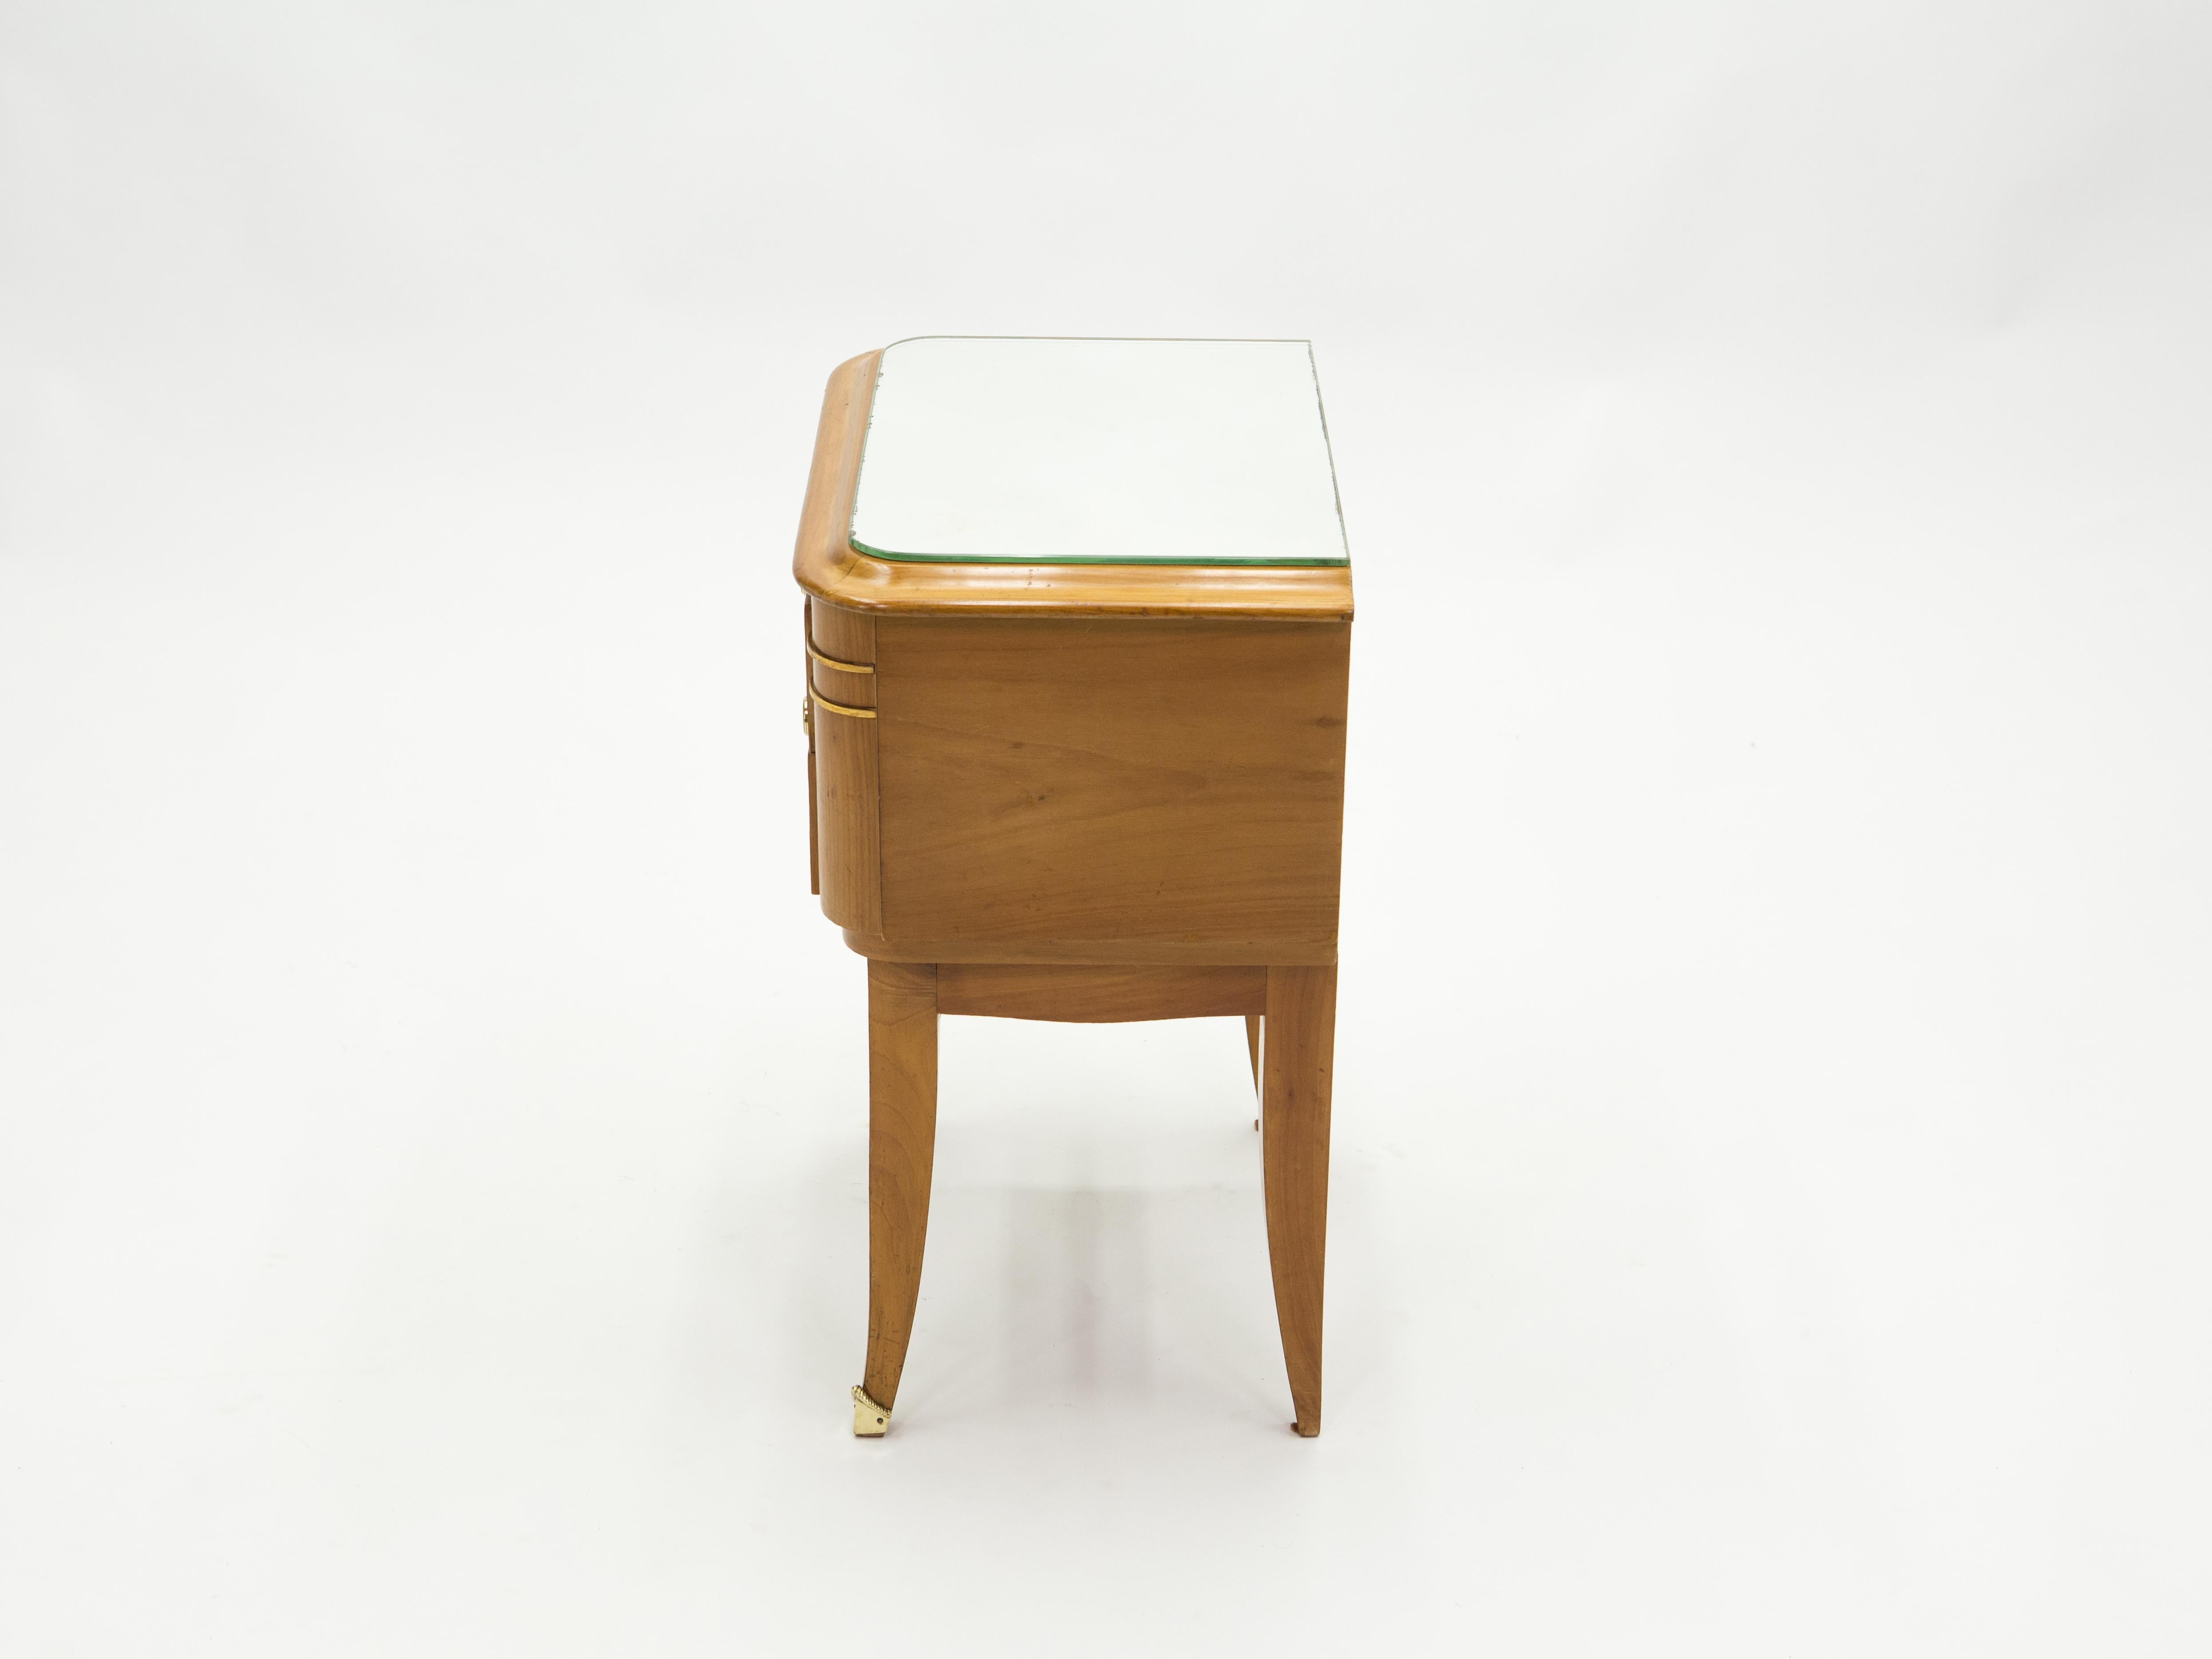 French Sycamore Brass Nightstands 2 Drawers by Jean Pascaud, 1940s For Sale 9